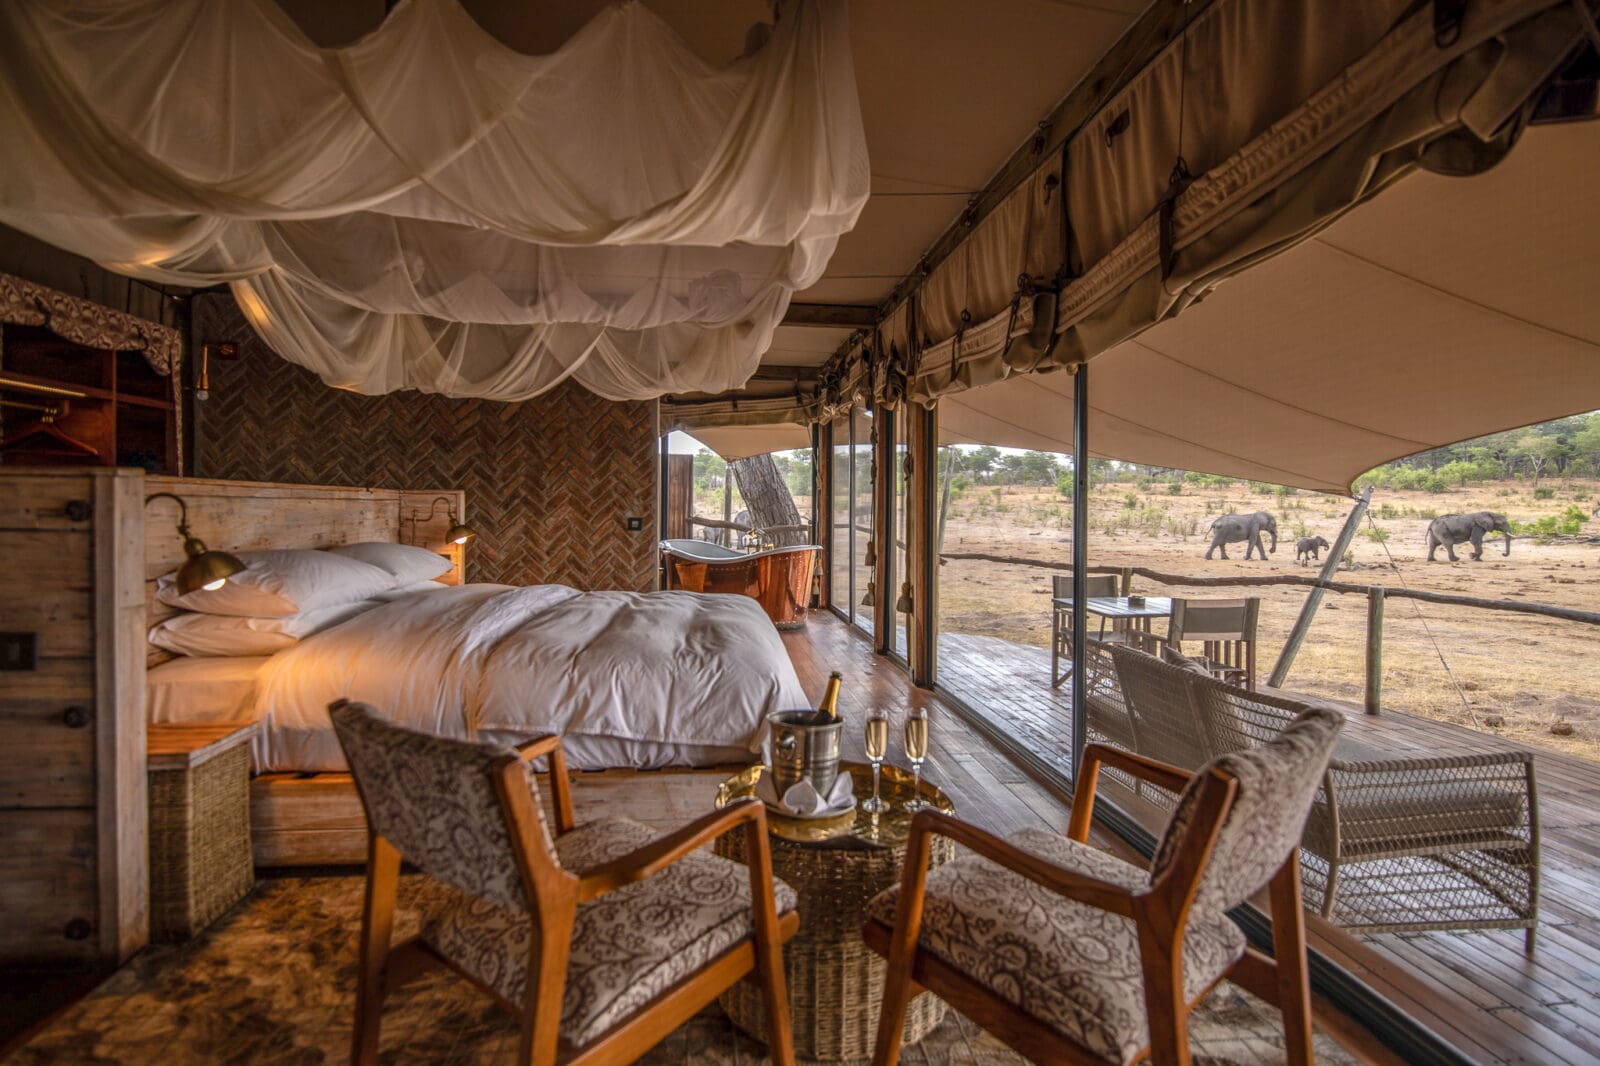 view from the inside of bushcamp bedroom overlooking wildlife in the bush